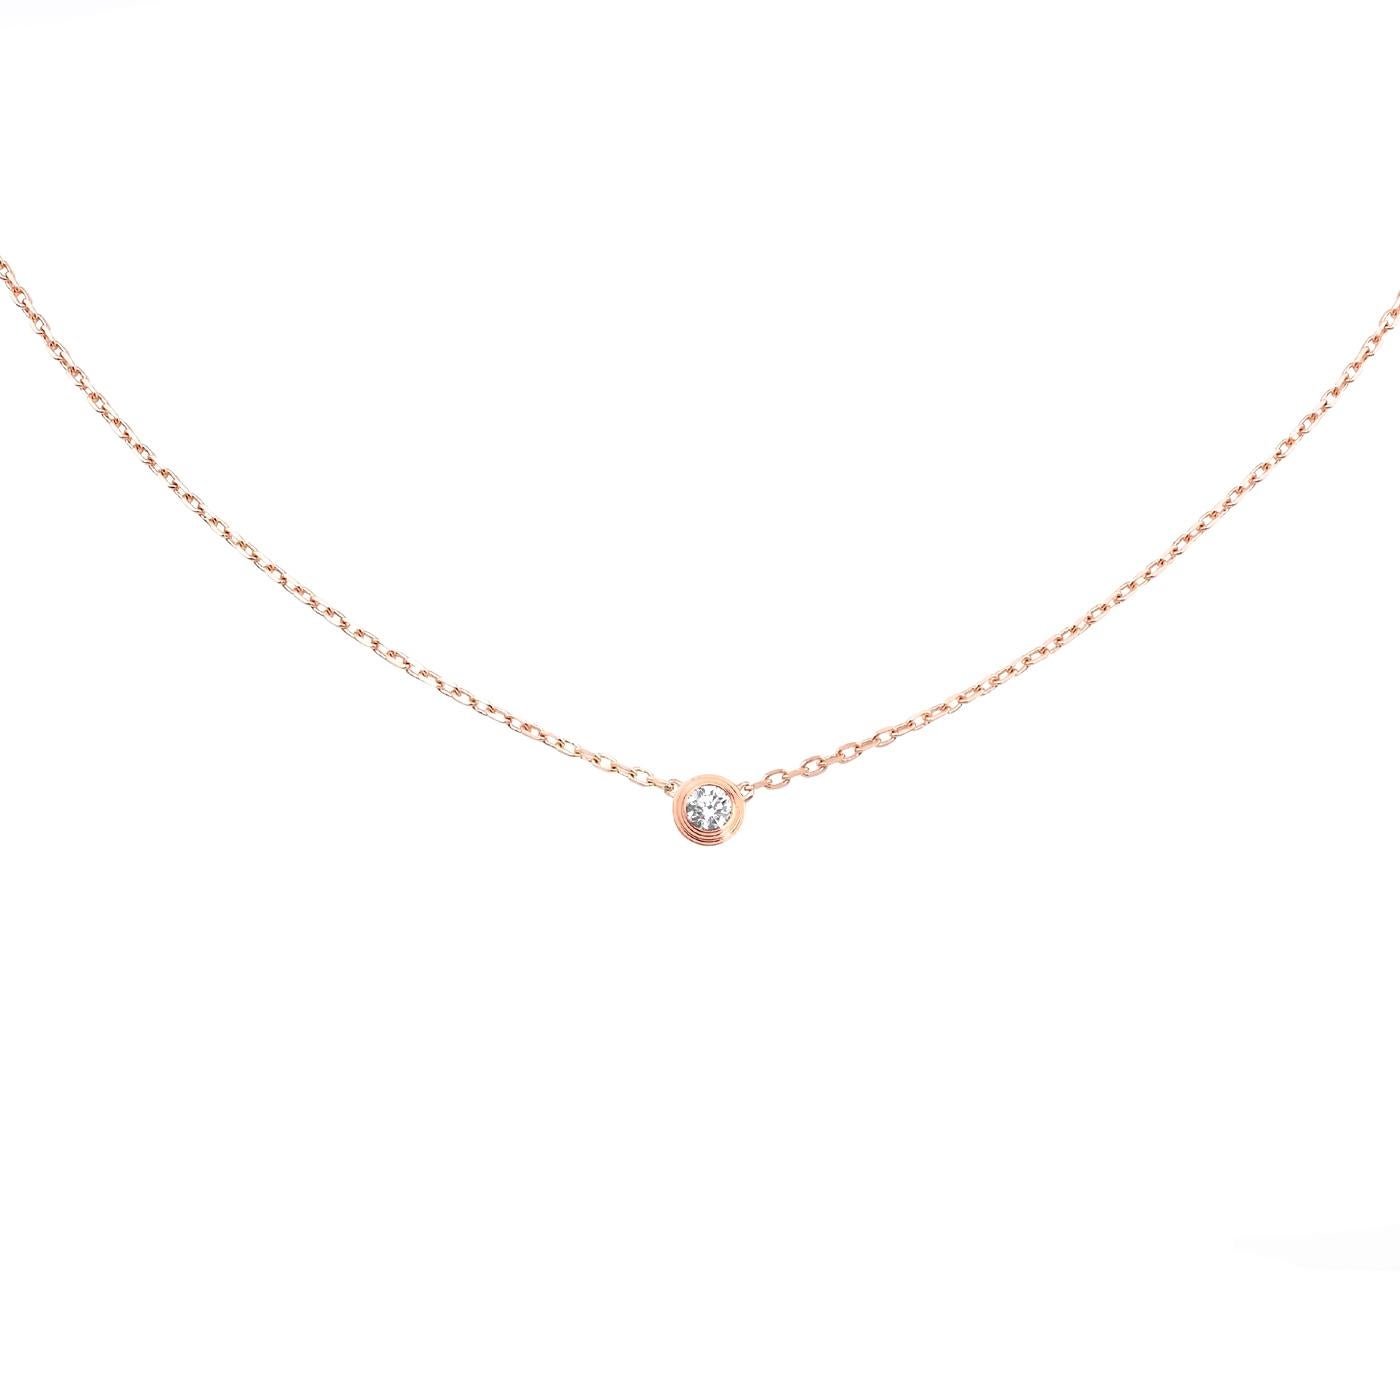 Cartier d'Amour necklace, small model, 18K rose gold (750/1000), set with a brilliant-cut diamond totaling 0.09 carat. Diameter of the pattern: 4.5 mm. Chain length: 380 to 410 mm.

Details:
Brand: Cartier
Carat Weight: 0.09 Carat
Shape Style: Round